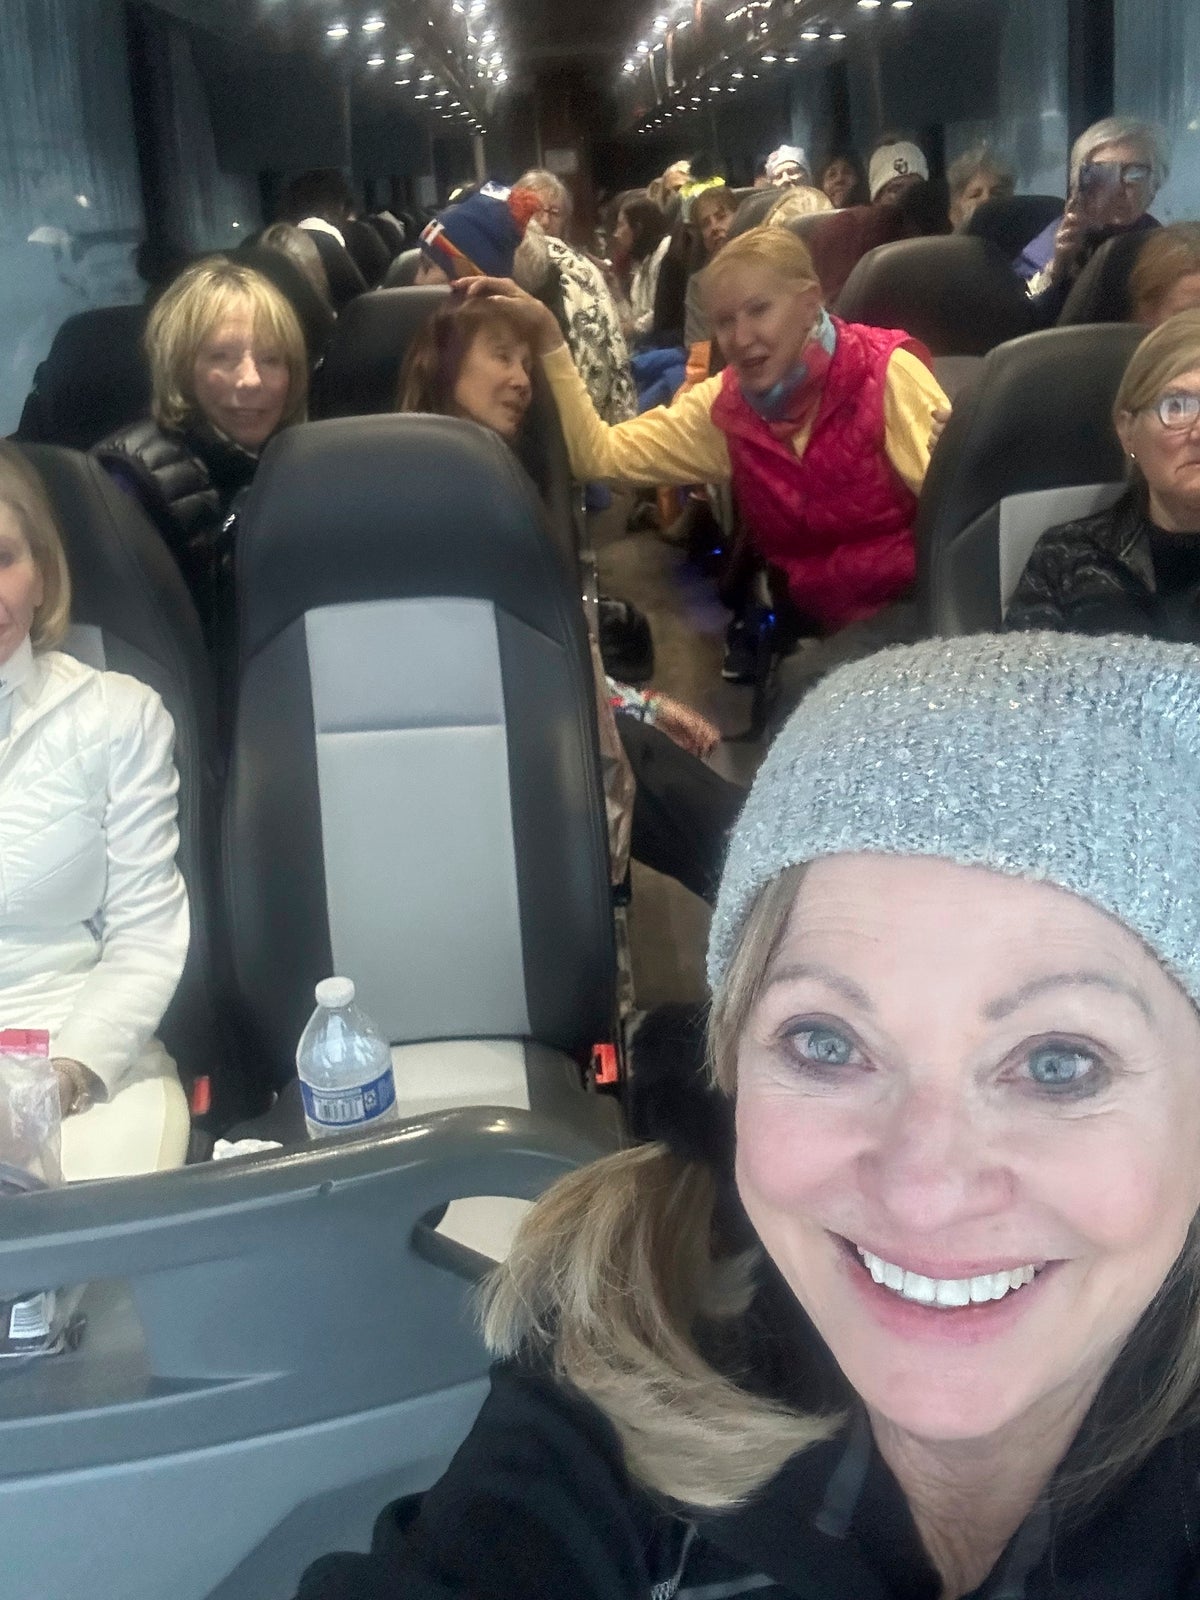 Weekly ski trip turns into overnight ordeal when about 50 women get stranded in bus during snowstorm